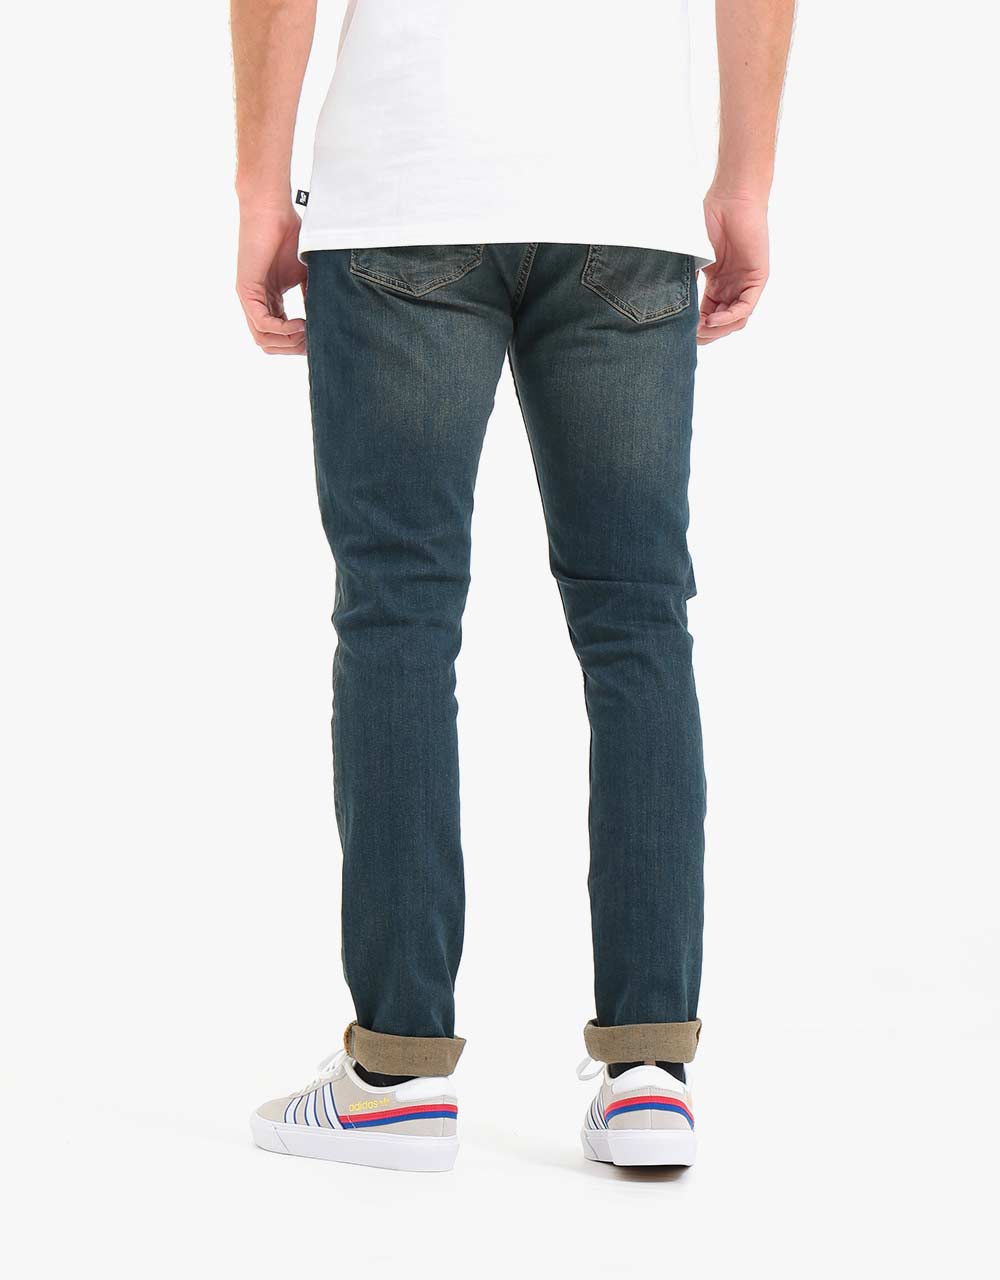 Route One Skinny Denim Jeans - Mid Wash